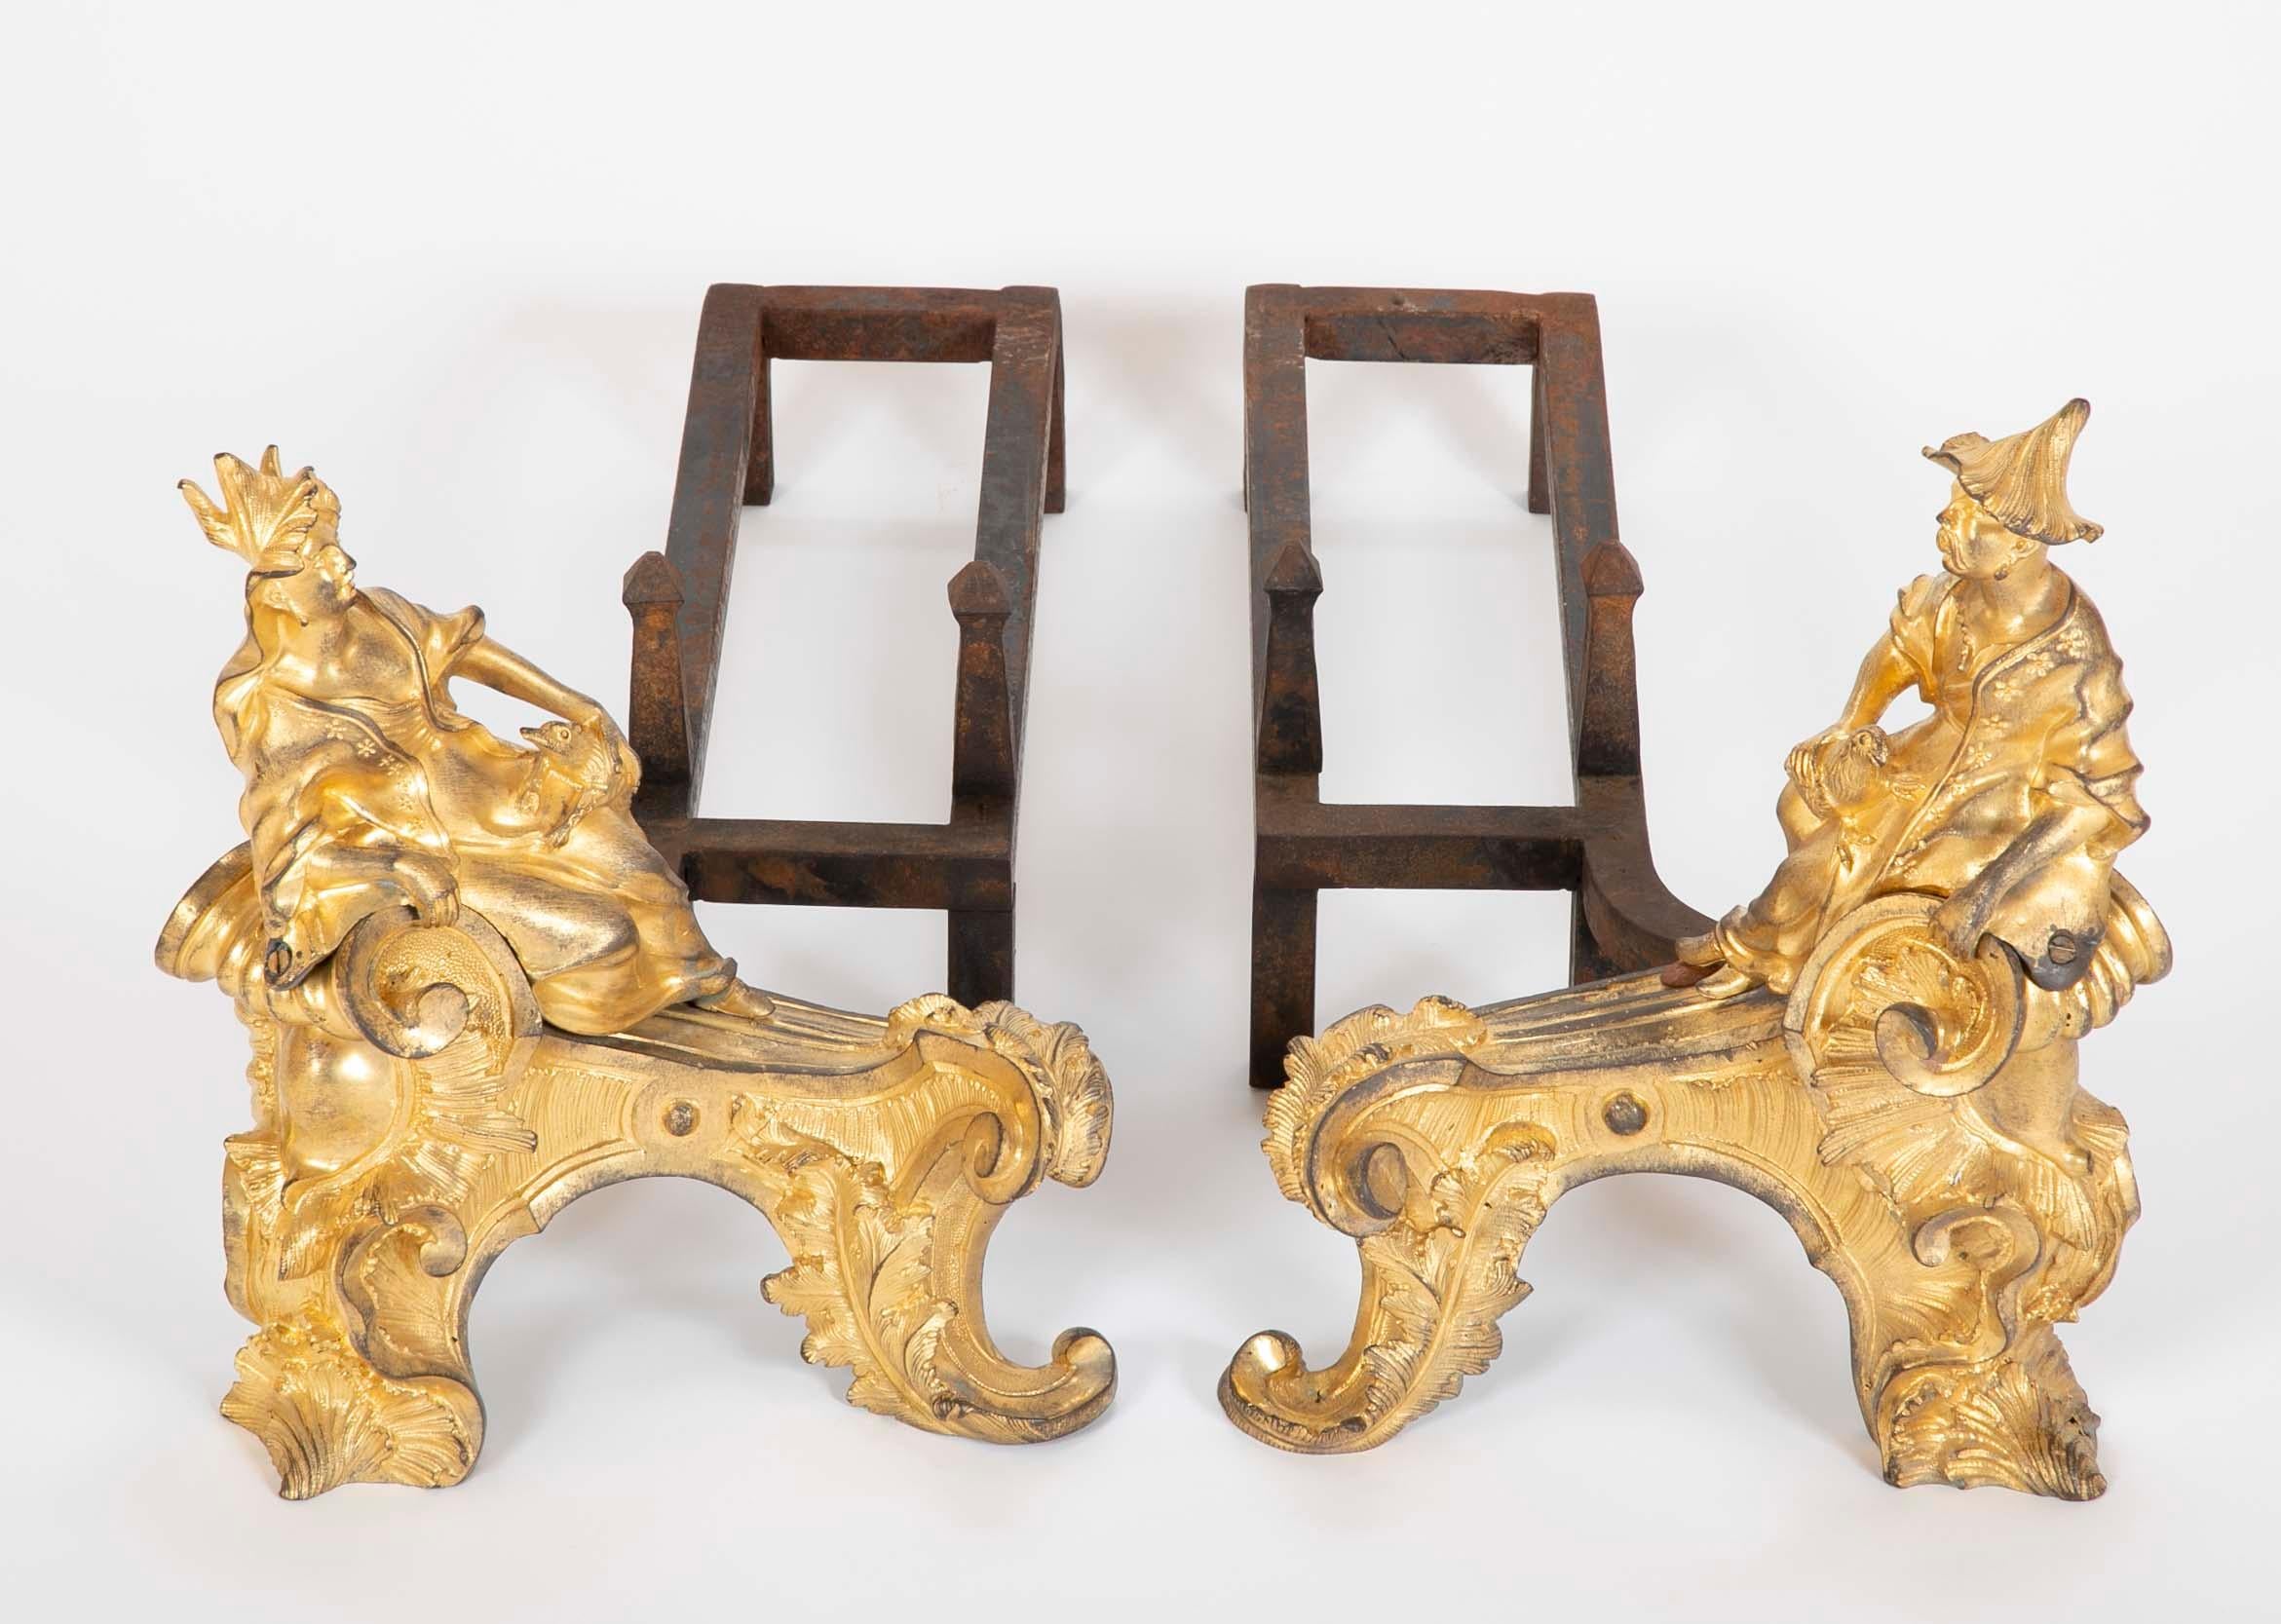 Pair of period Louis XV dore bronze Chenets. Depicting male and female chinoiserie figures.